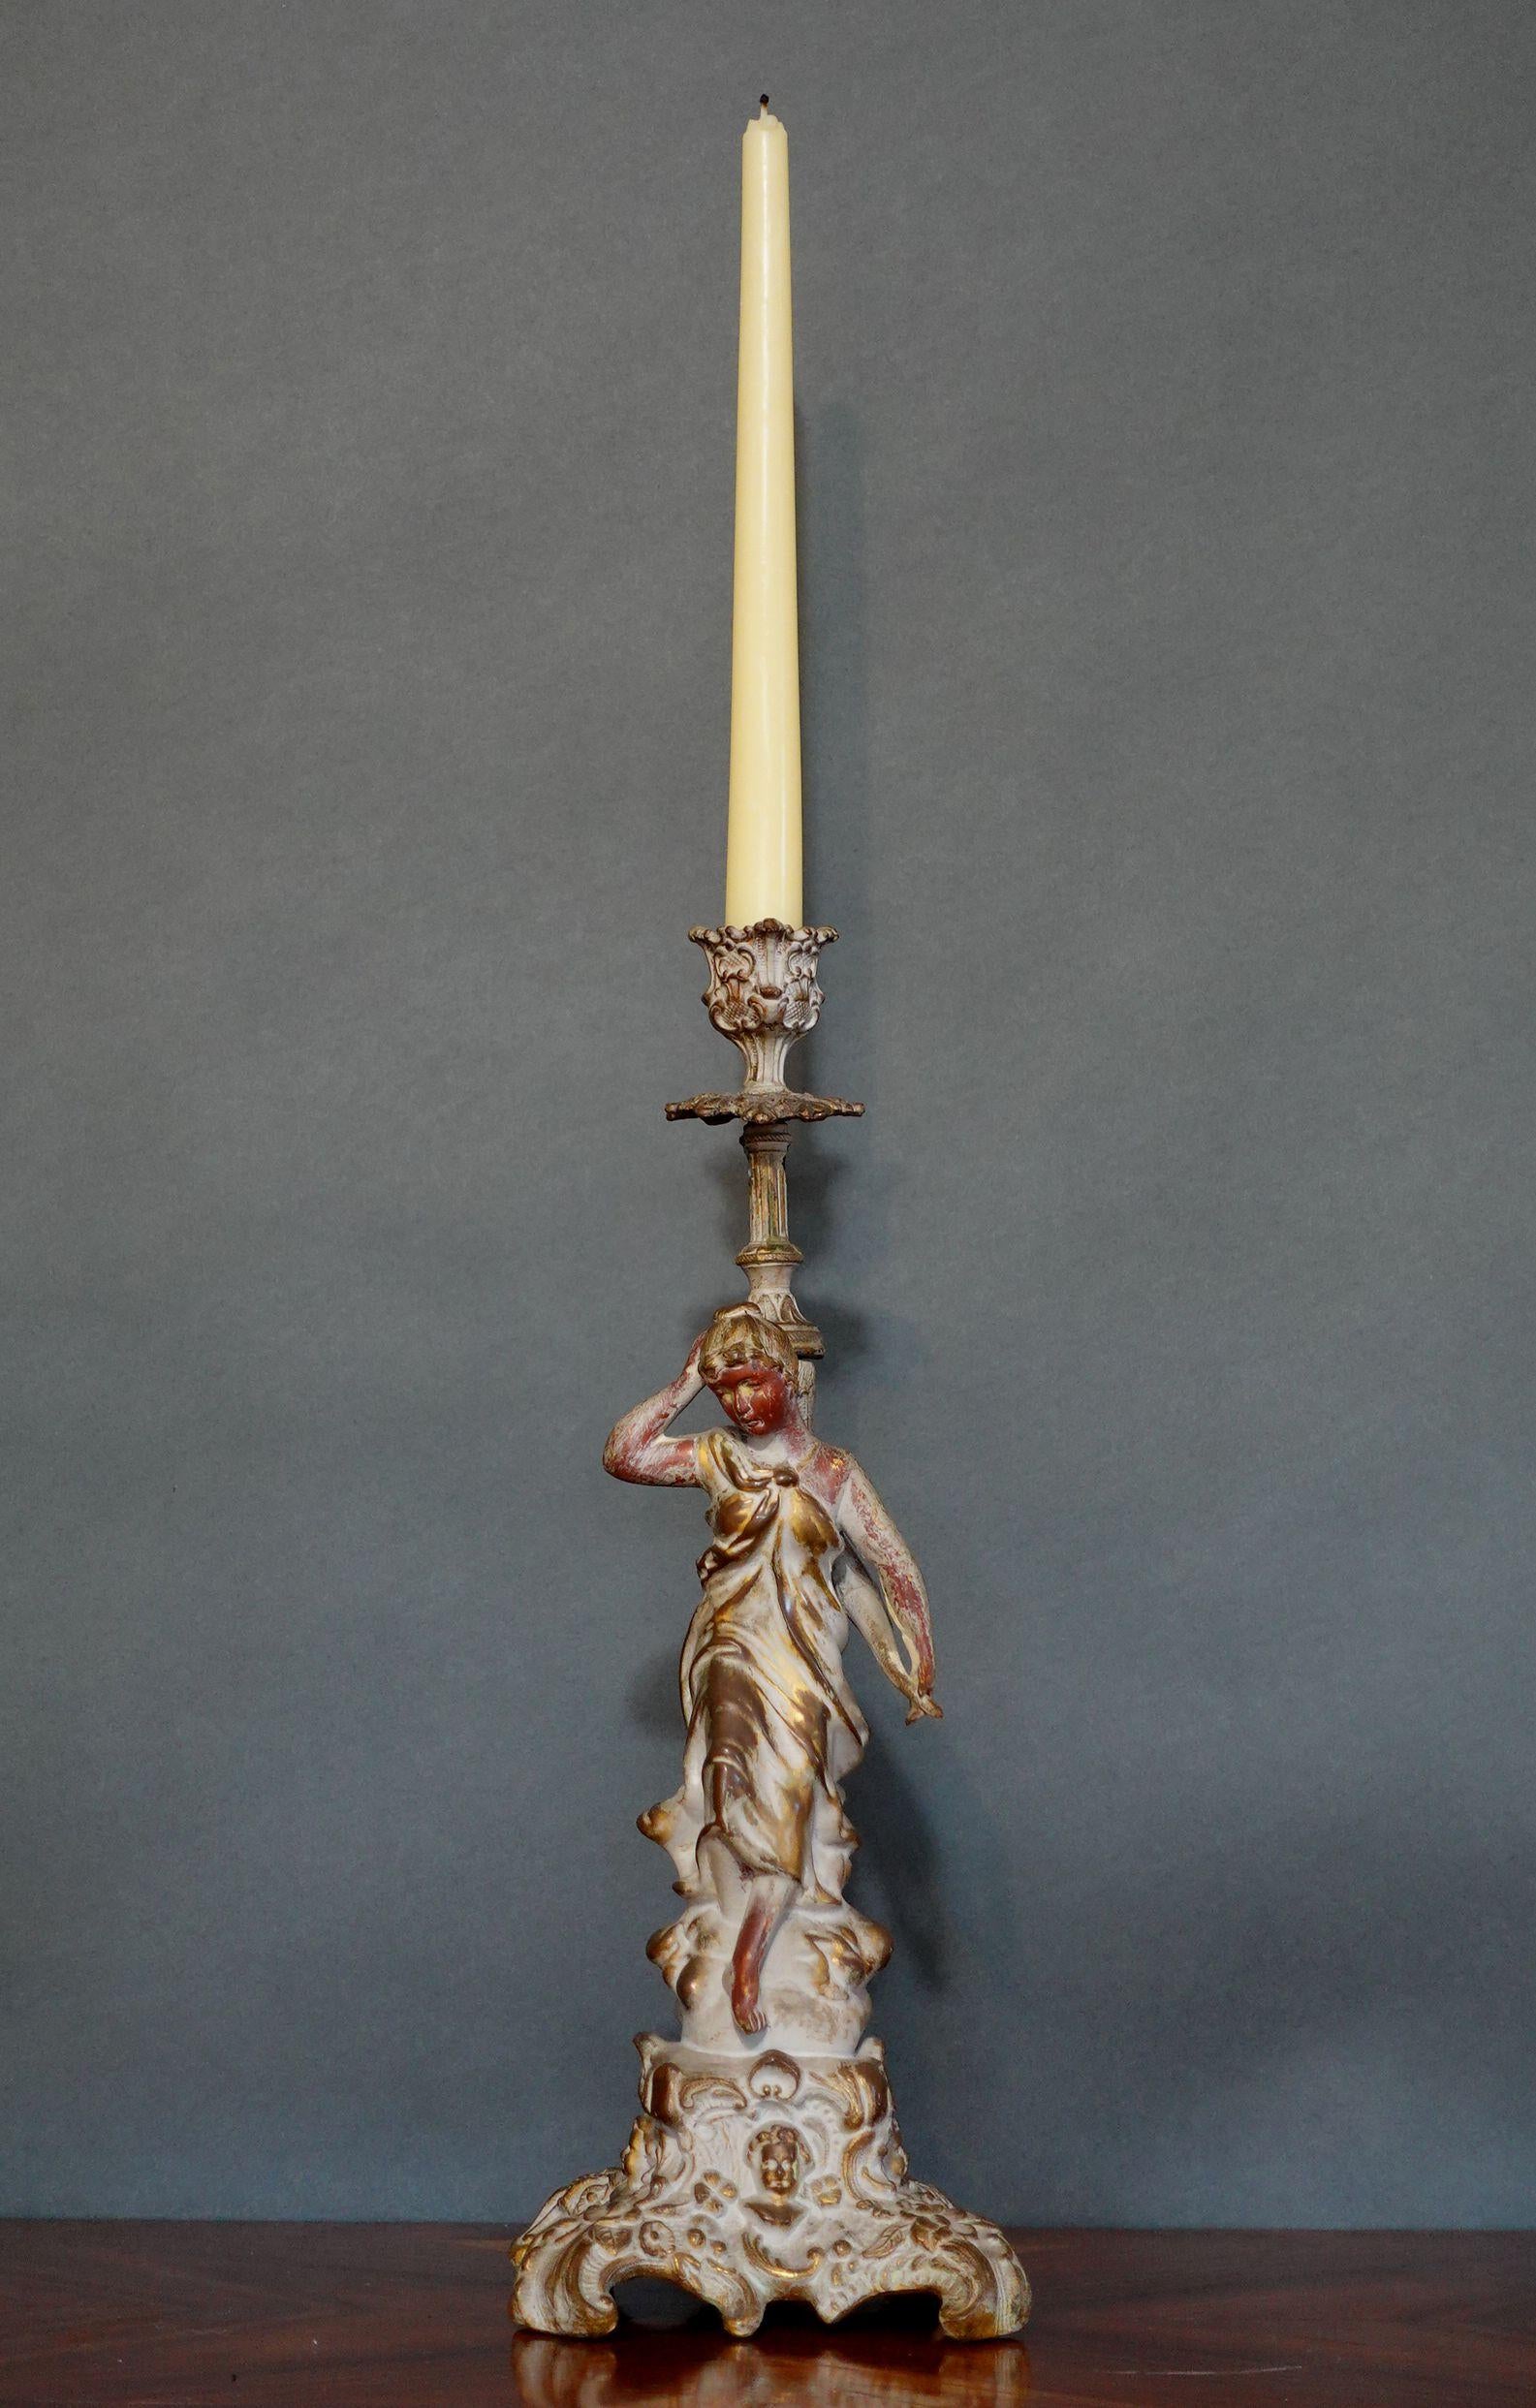 19th century a French patinated bronze sculpture candelabra candleholder with a traditional French style sculpture, gilt at the bottom.

    